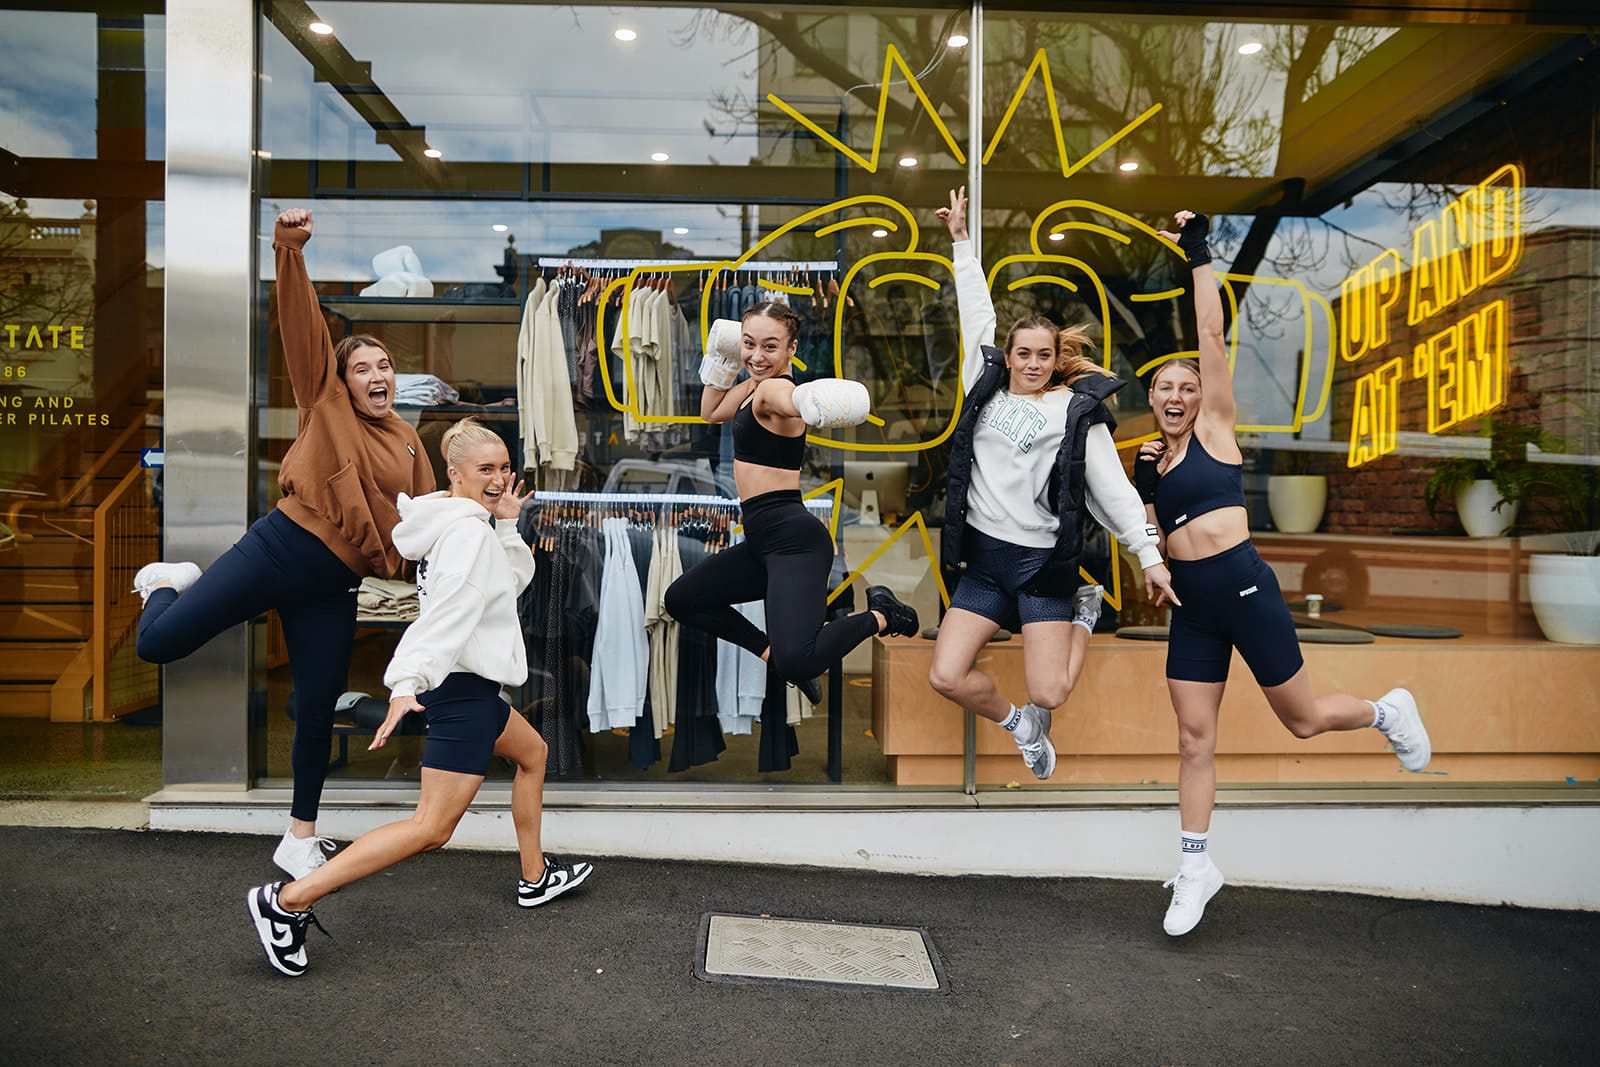 Joyful group of Upstaters celebrate outside Upstate Studios. They jump up happily, waving towards the viewer. The outside of the studio is a chic window showcasing cool neon signage and motivating graphics.